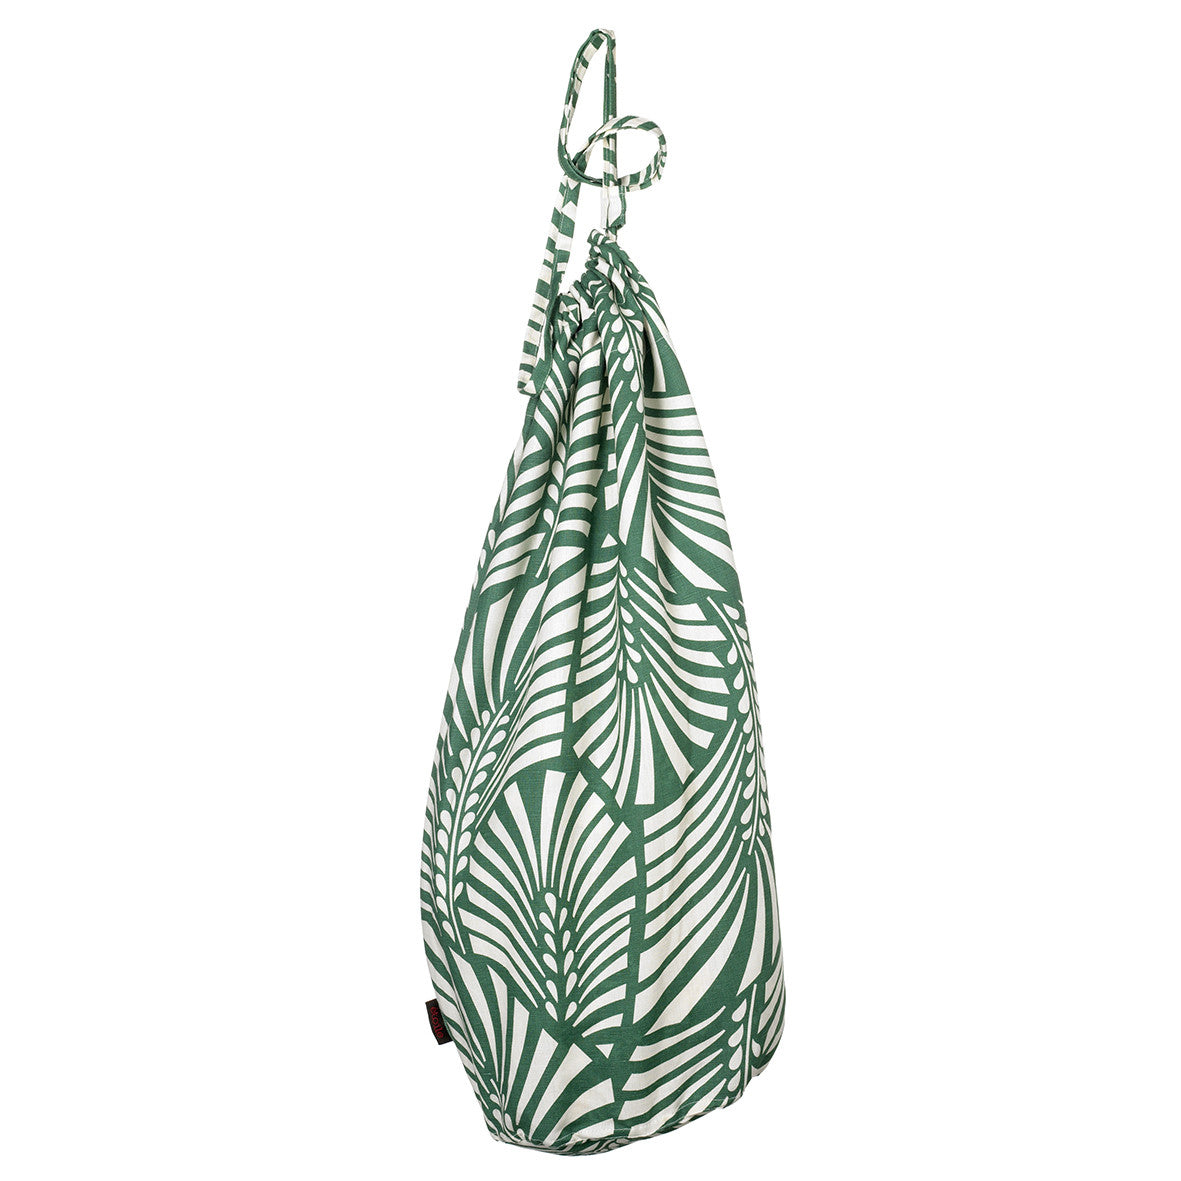 Oscar Palm Leaf Pattern Printed Linen Cotton Drawstring Laundry & Storage Bags in Dark Moss Green Ships from Canada (USA)